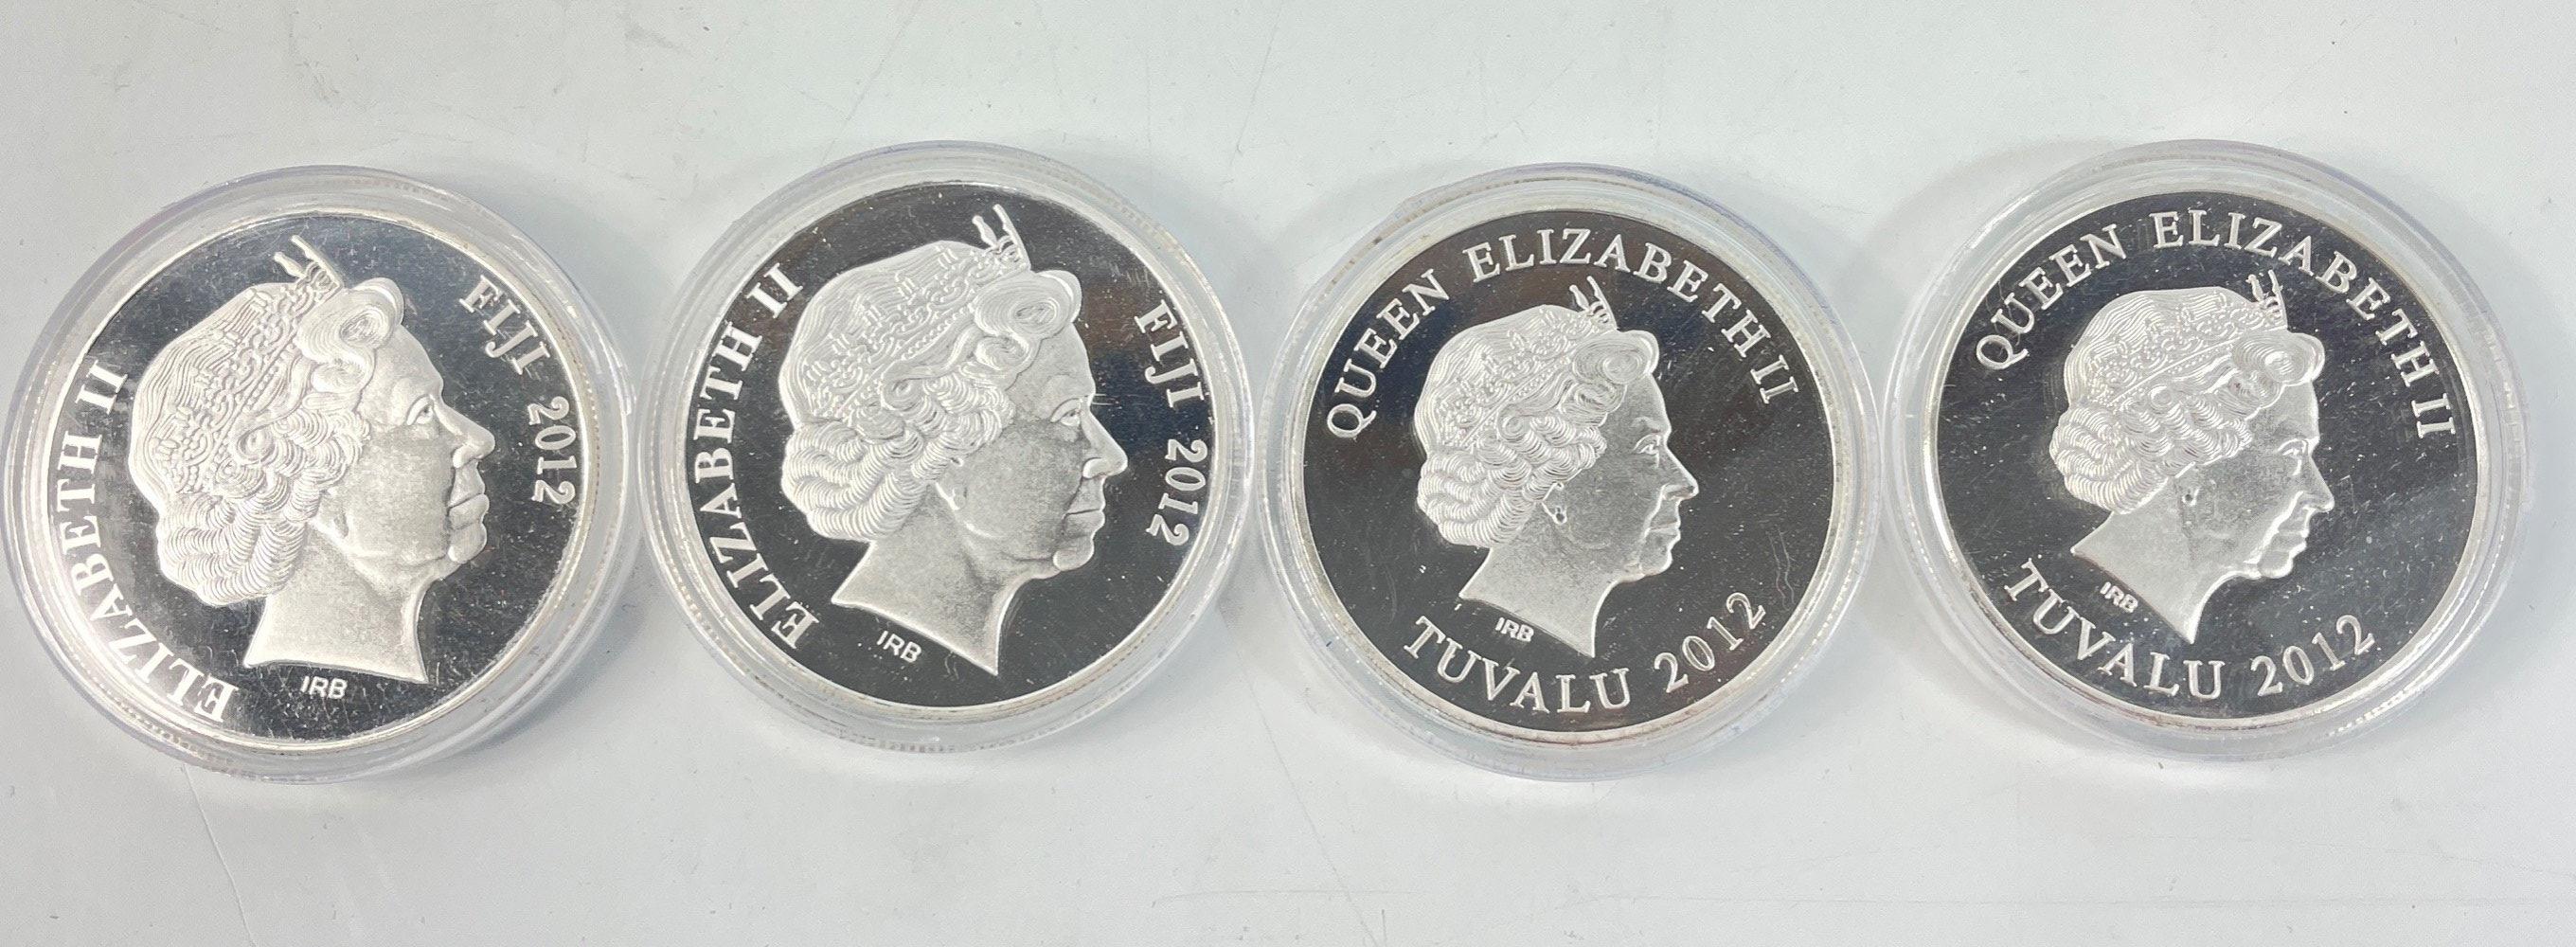 An encapsulated Canadian 1912 100th Commemorative RMS Titanic coin and also a SILVER Commemorative - Image 2 of 2